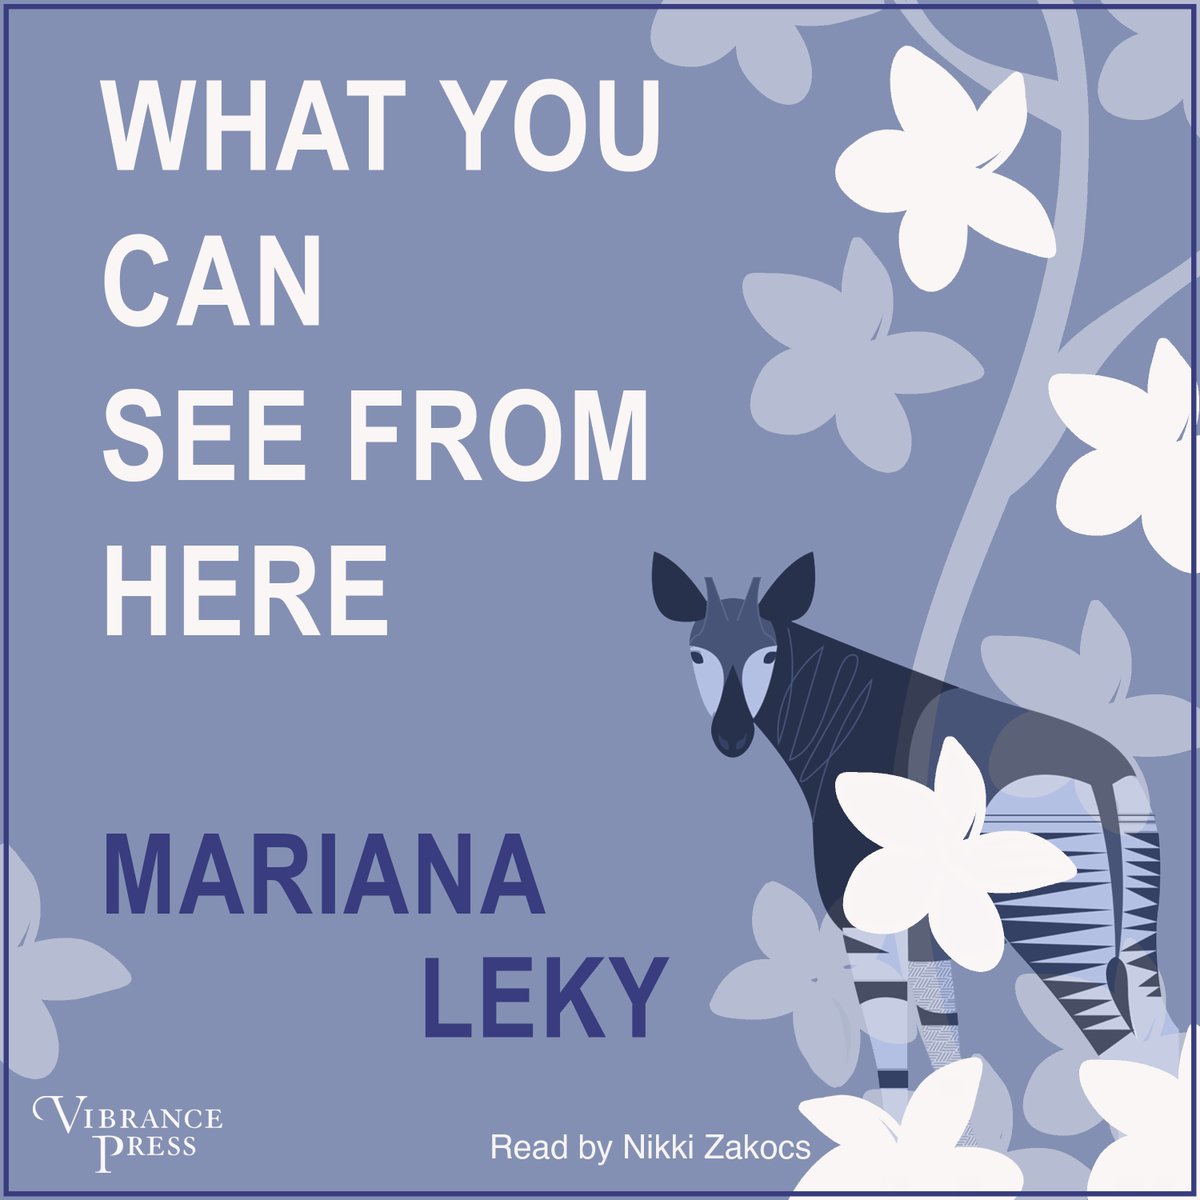 An International Bestseller, a heartwarming story in a small town, a grandmother who foretells a coming death, and the young woman forever changed by these losses and her loving, endearingly oddball community.

WHAT YOU CAN SEE FROM HERE by Mariana Leky, narrated by @NZakocs